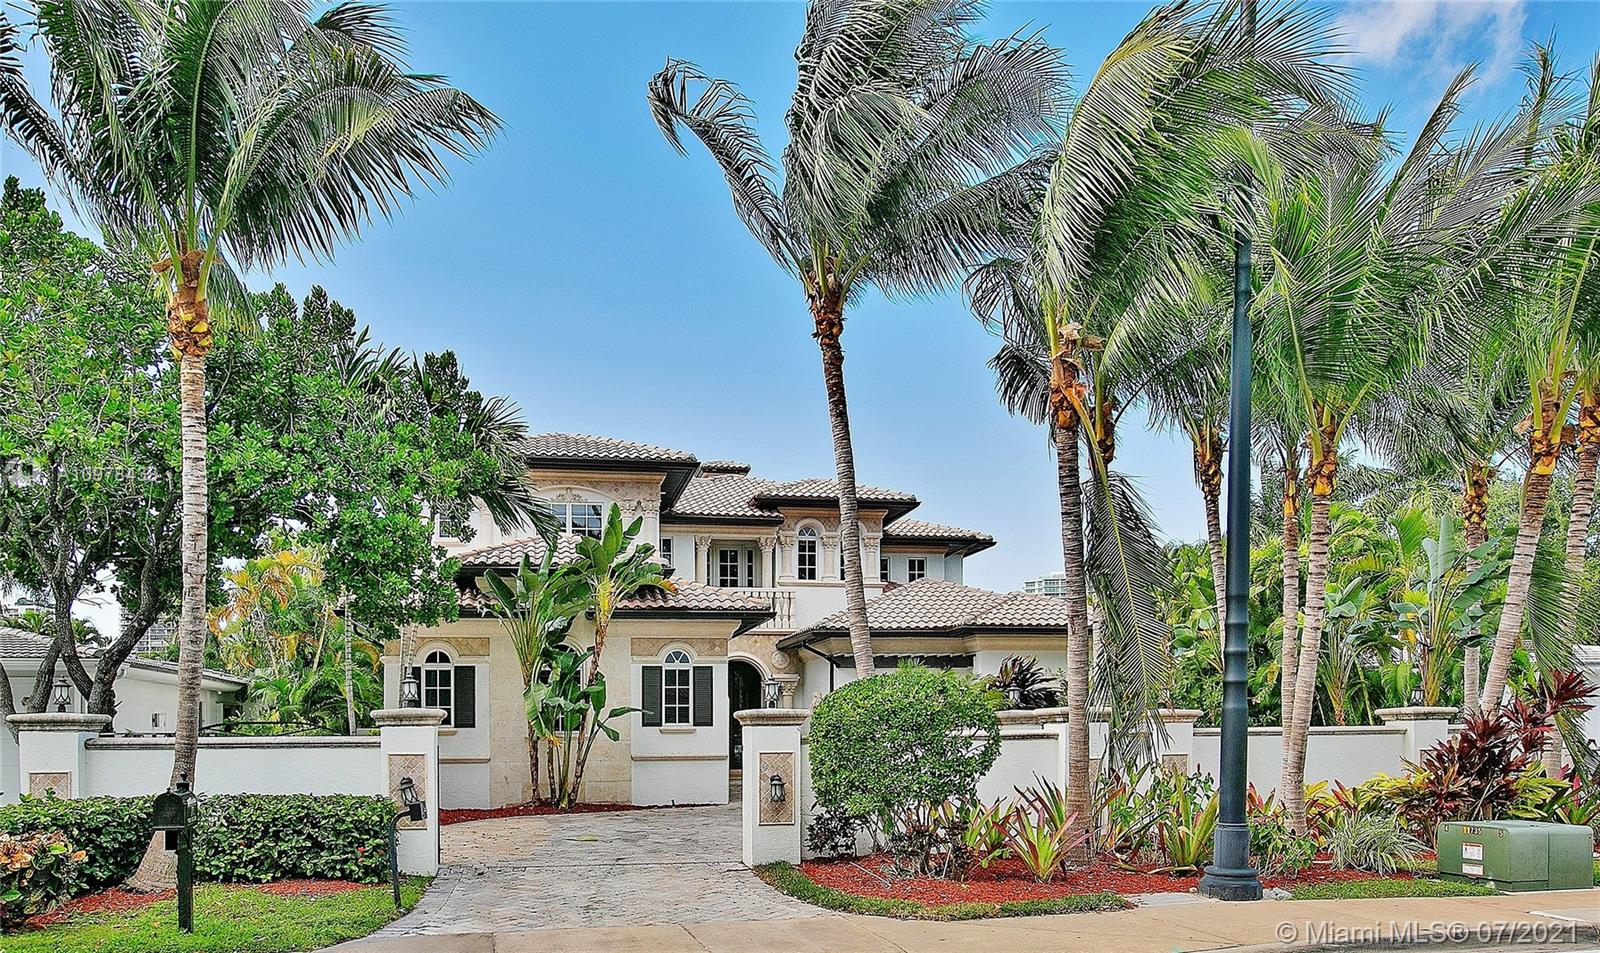 Luxury Home at Golden Beach, Fl. 6 Bedrooms 5 Bathrooms 2 Powder rooms, 2 master bathrooms, 3 car garage, separate guest suite, downstairs office, spacious gated driveway, kosher gas kitchen, indoor/outdoor fireplaces, waterfall pool & spa, summer kitchen, upstairs loft with bar/midnight kitchen, built-in stereo system, elevator, vaulted ceilings.